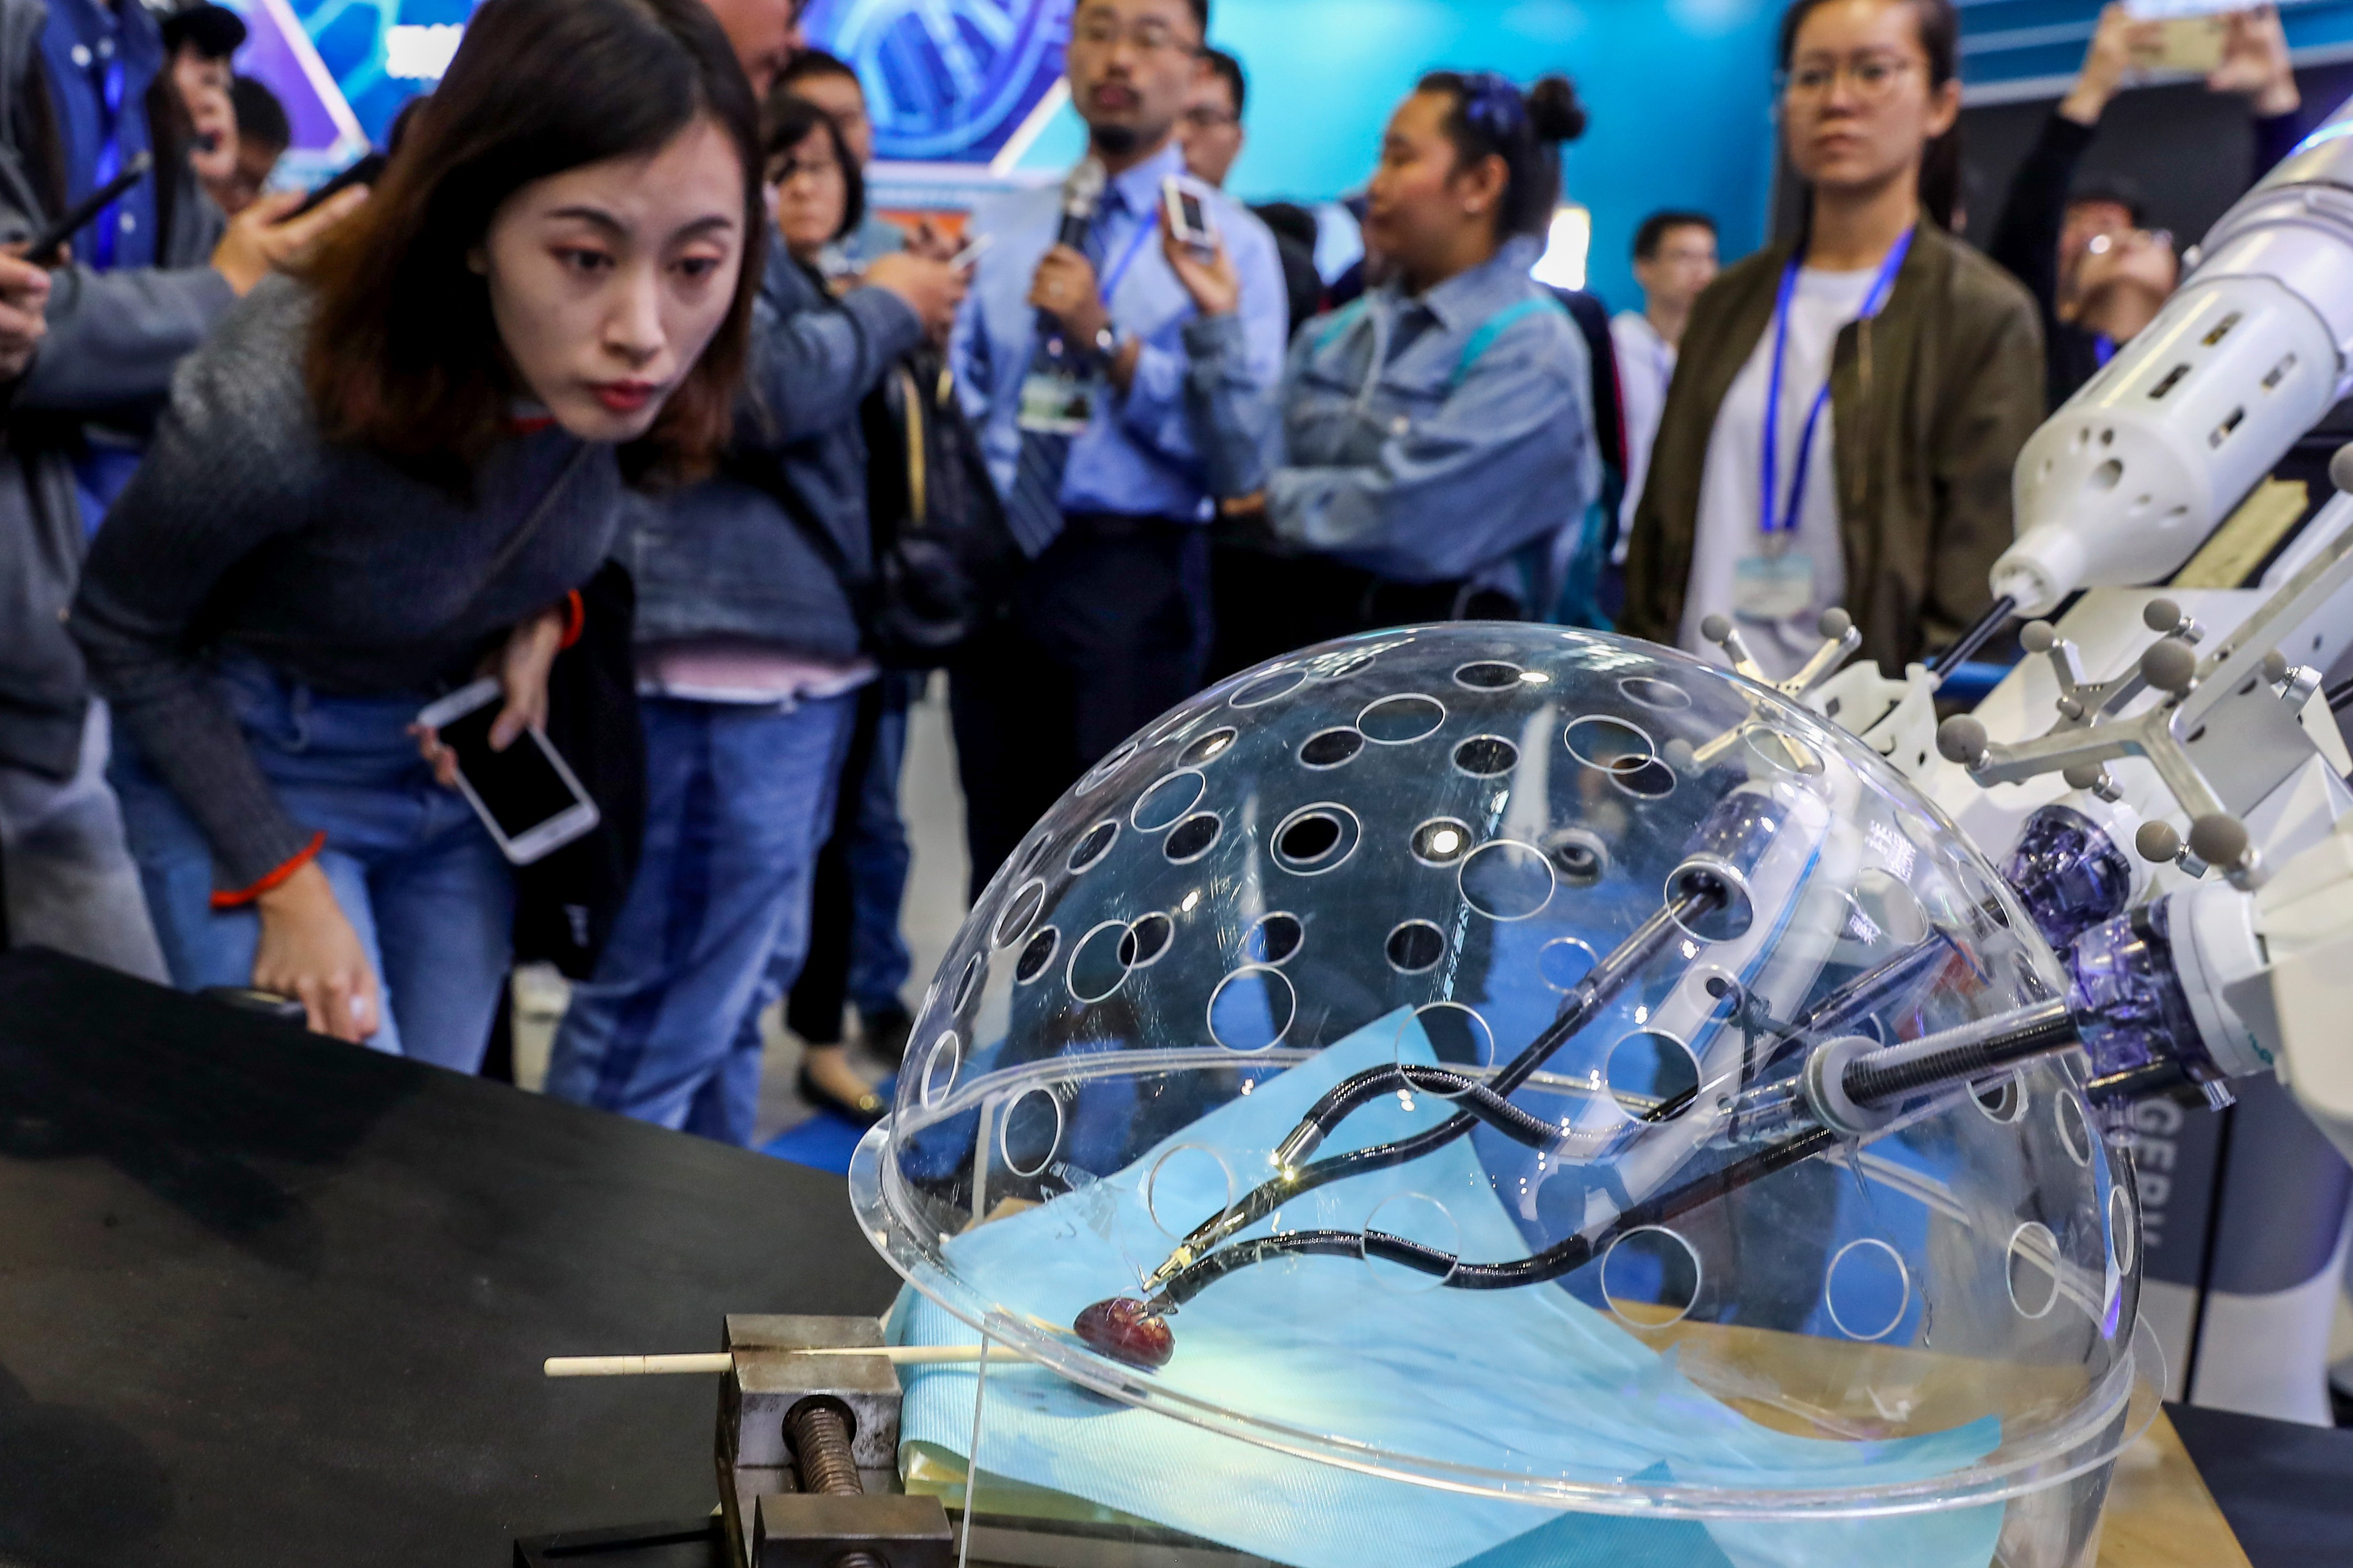 Members of the media look at a robot system for porotic laparoscopic surgery during a preview of the National Mass Innovation and Entrepreneurship Week in Beijing in October 2018. The US has criticised China for intellectual property theft. Photo: Xinhua